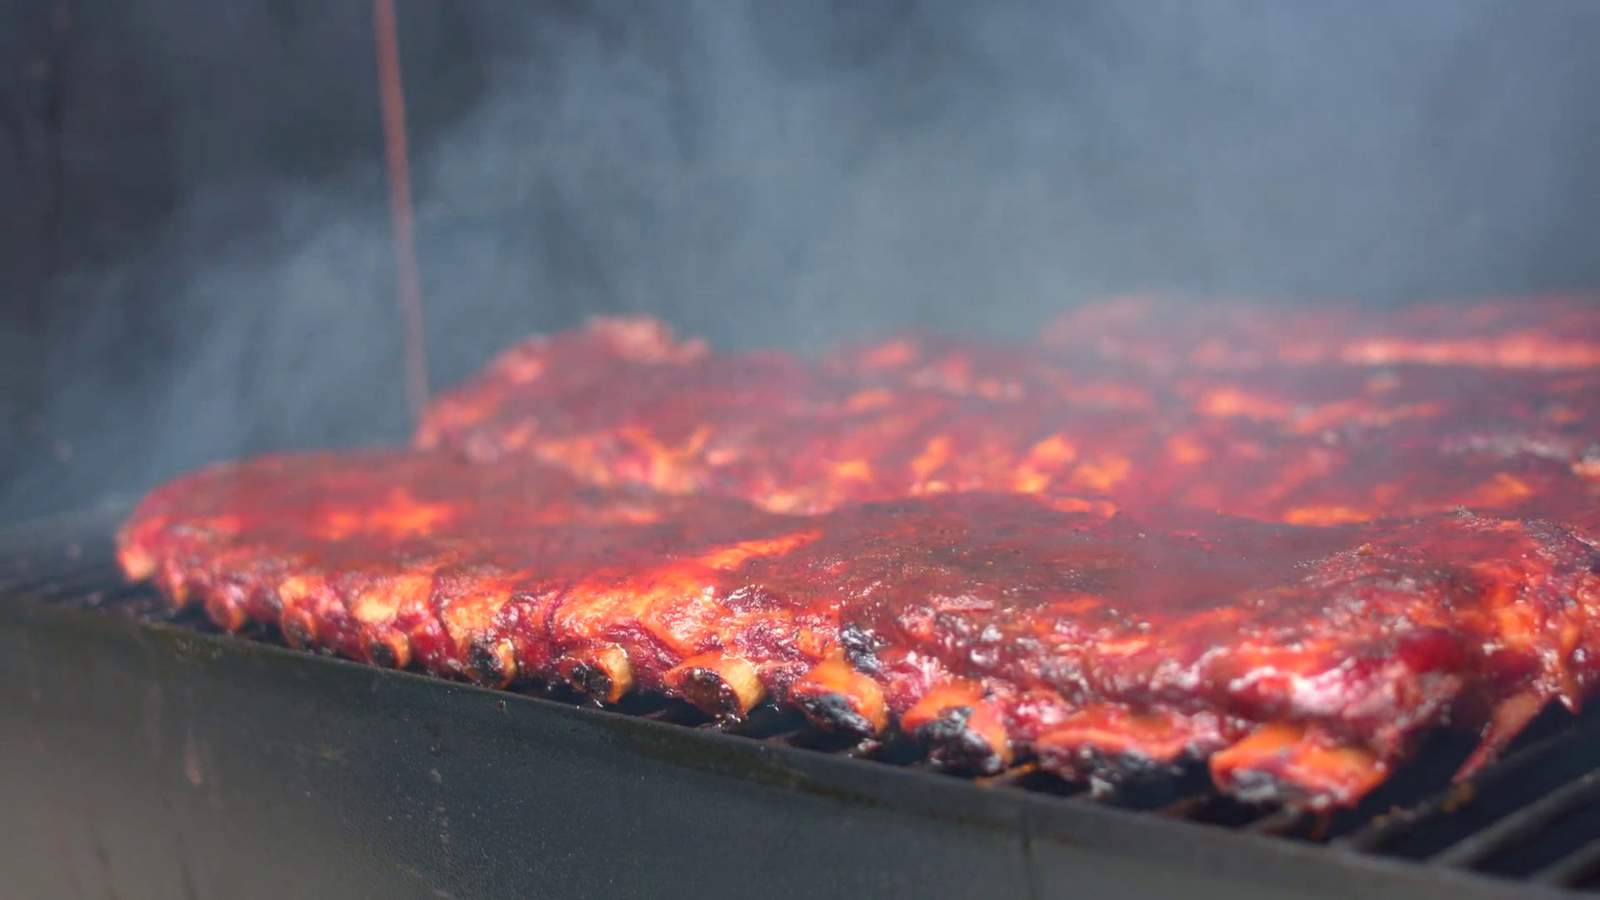 VIDEO: What makes for the best BBQ grills and smokers?